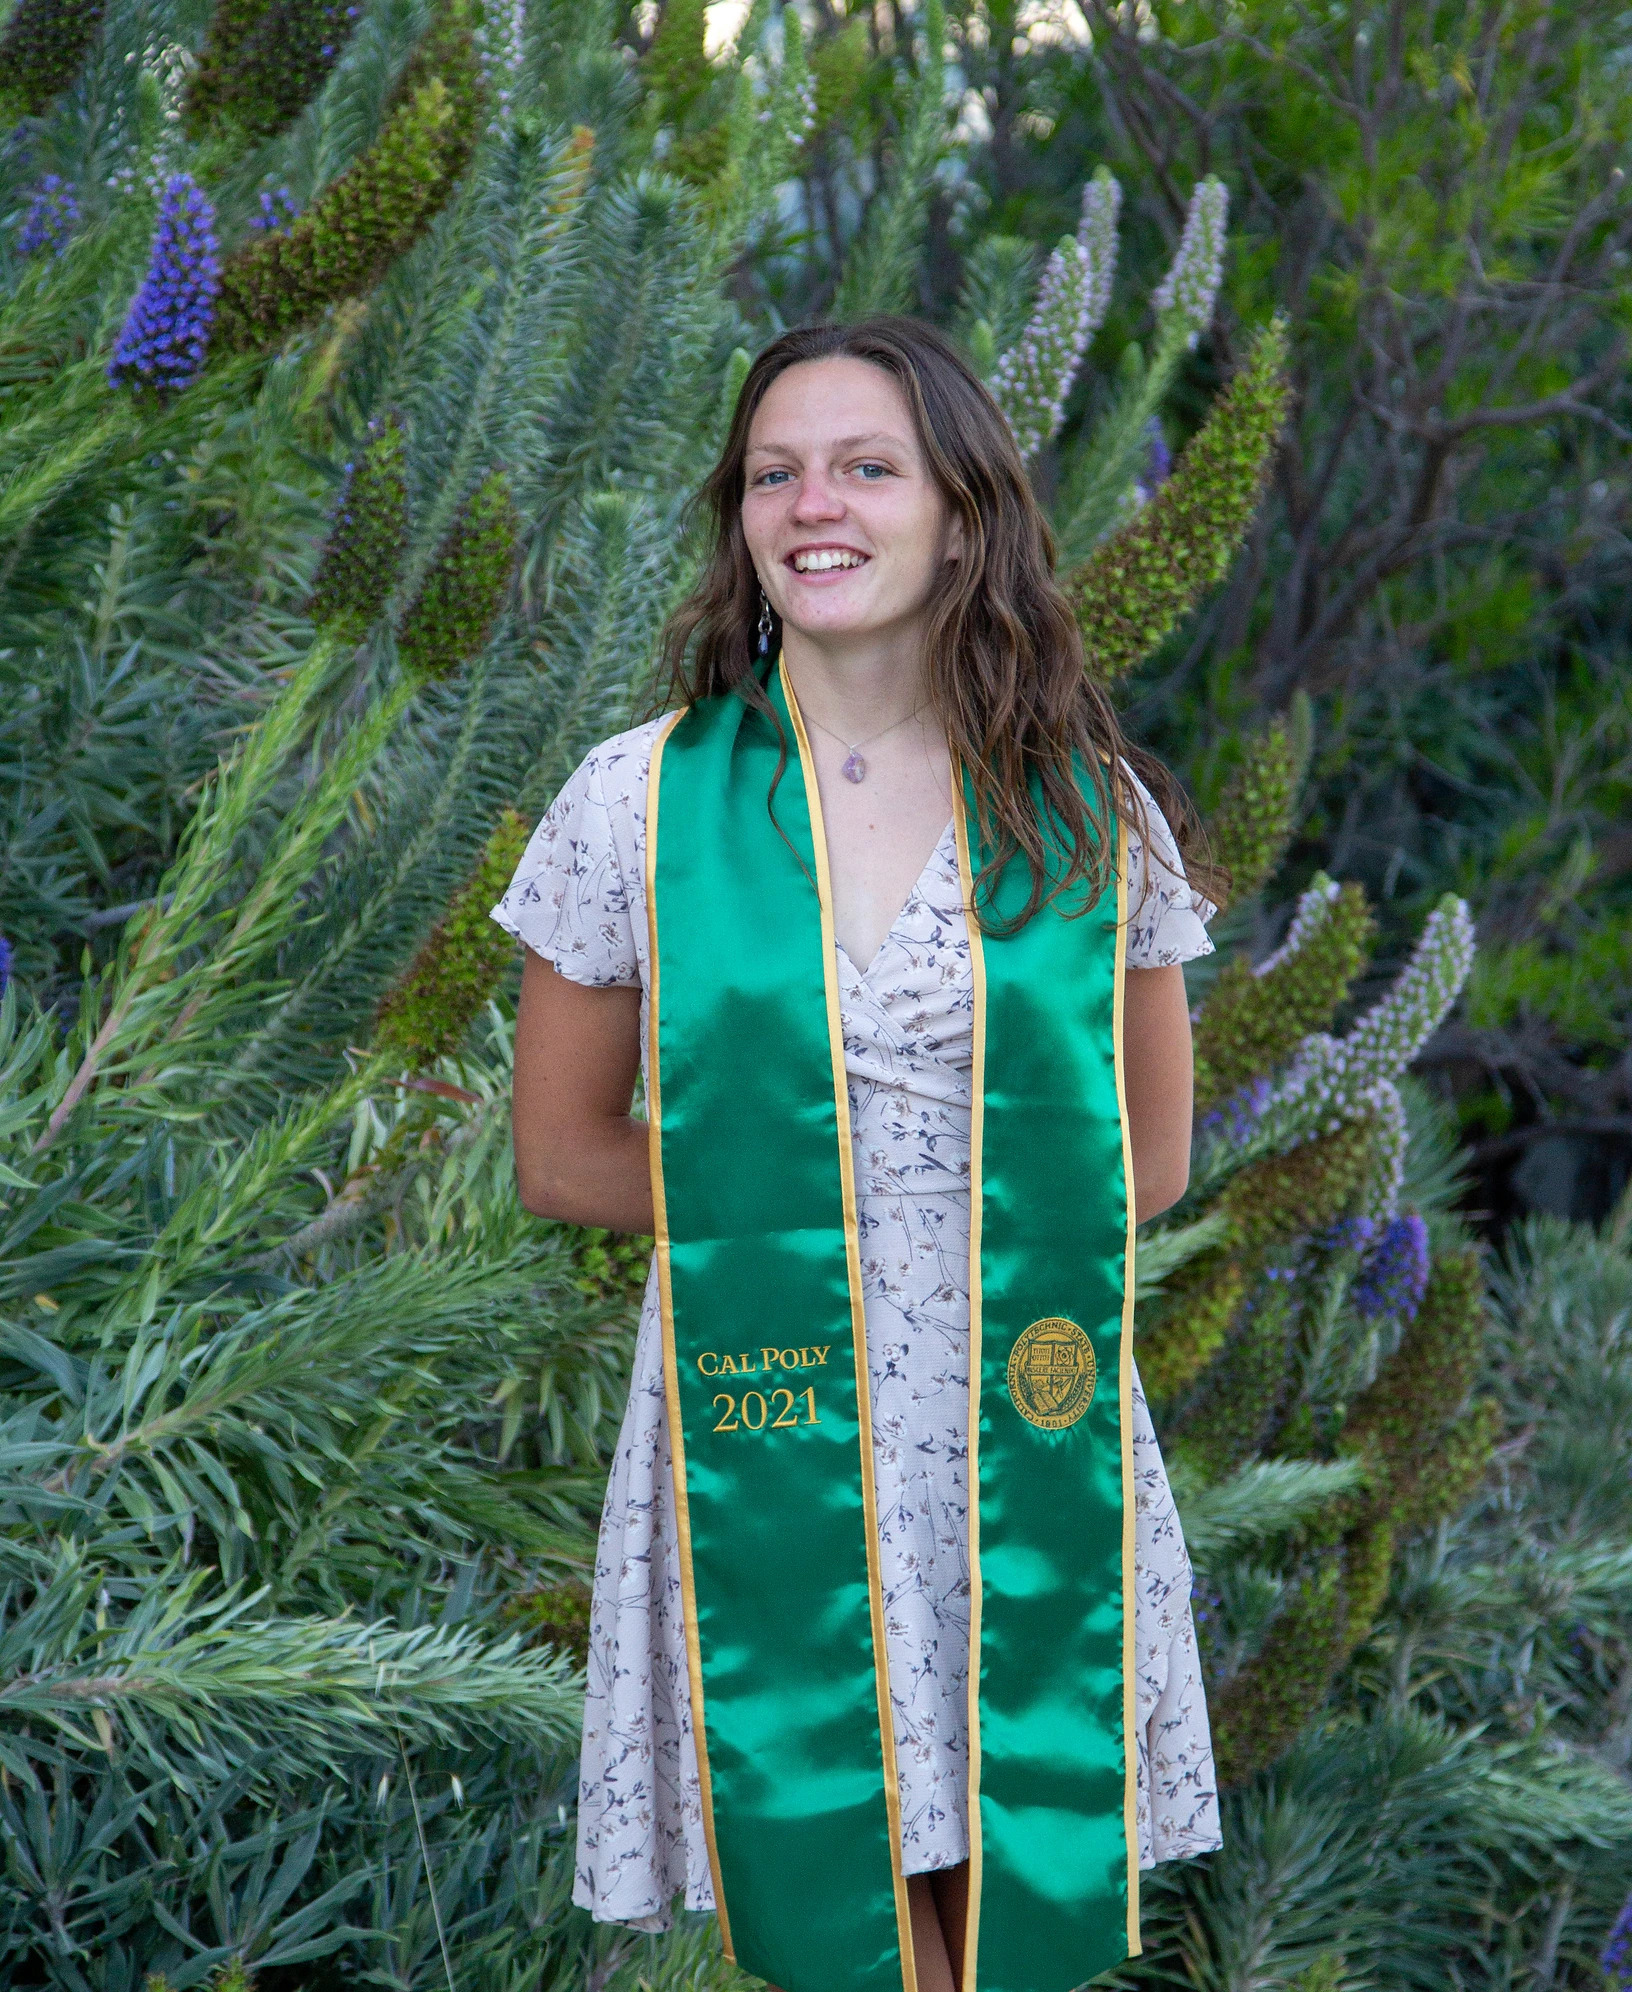 Noel Clark poses in a printed dress and a green Cal Poly graduation stole.